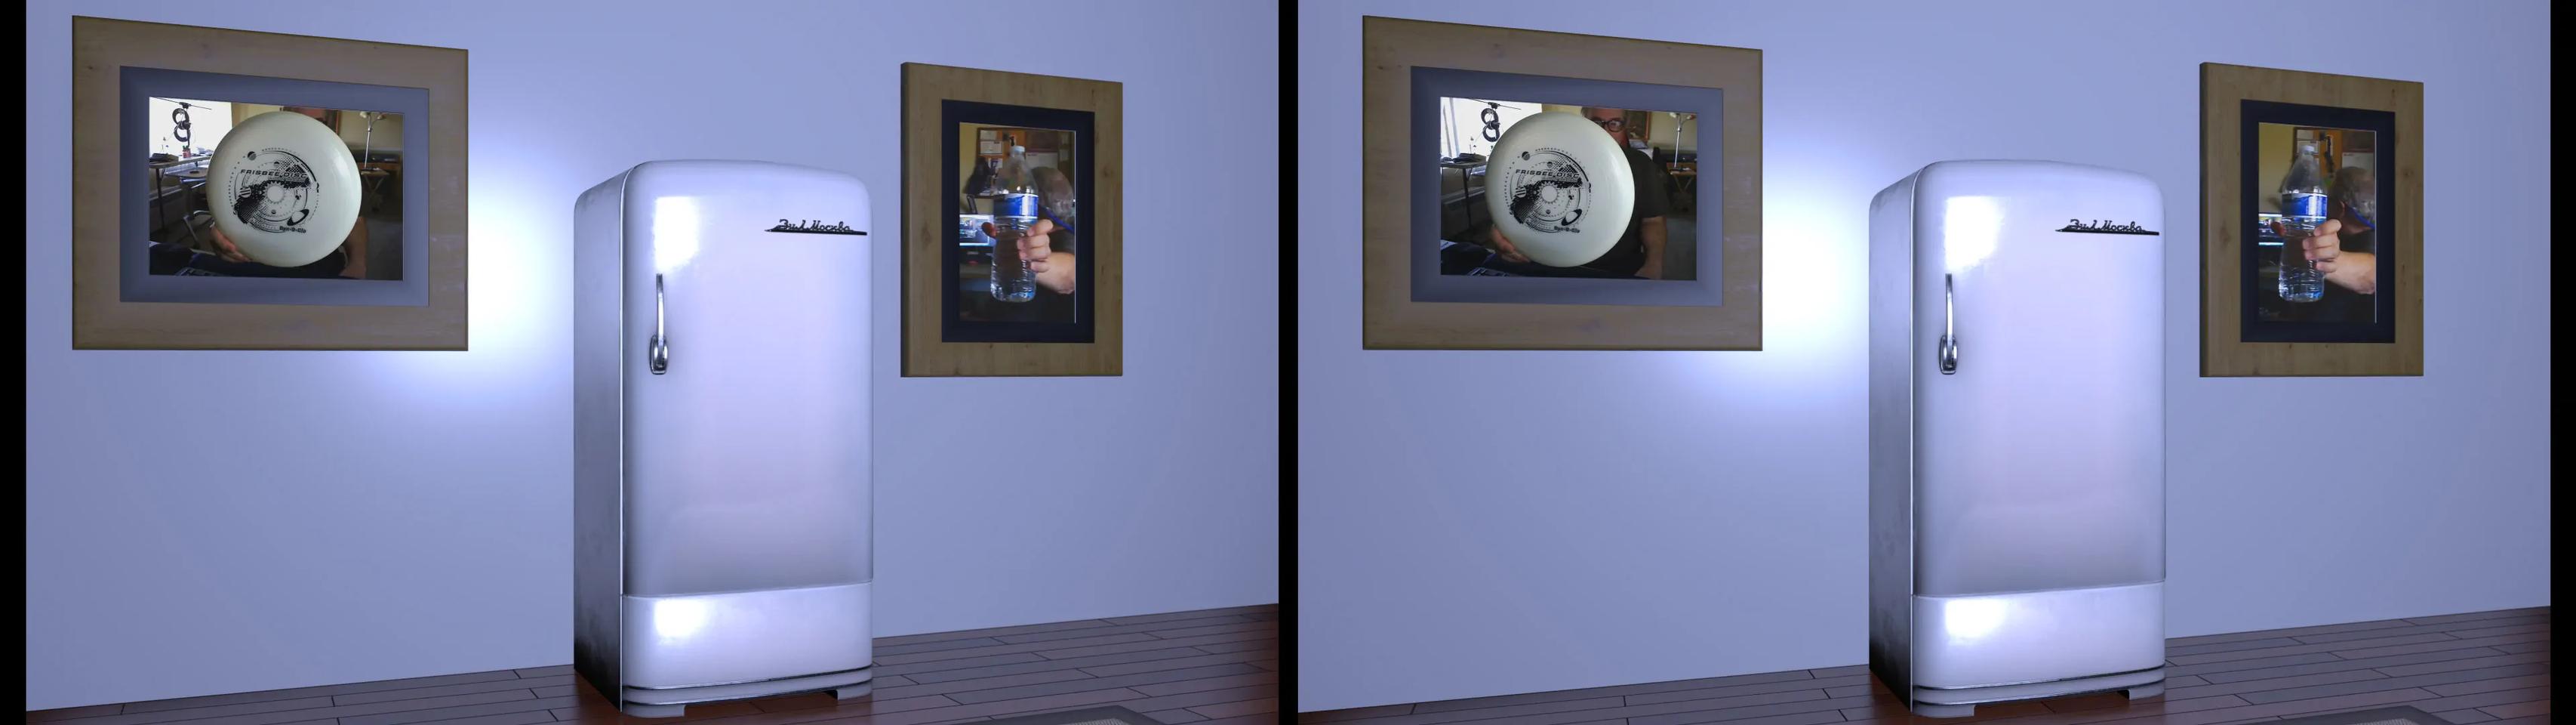 3D Photos On The Walls